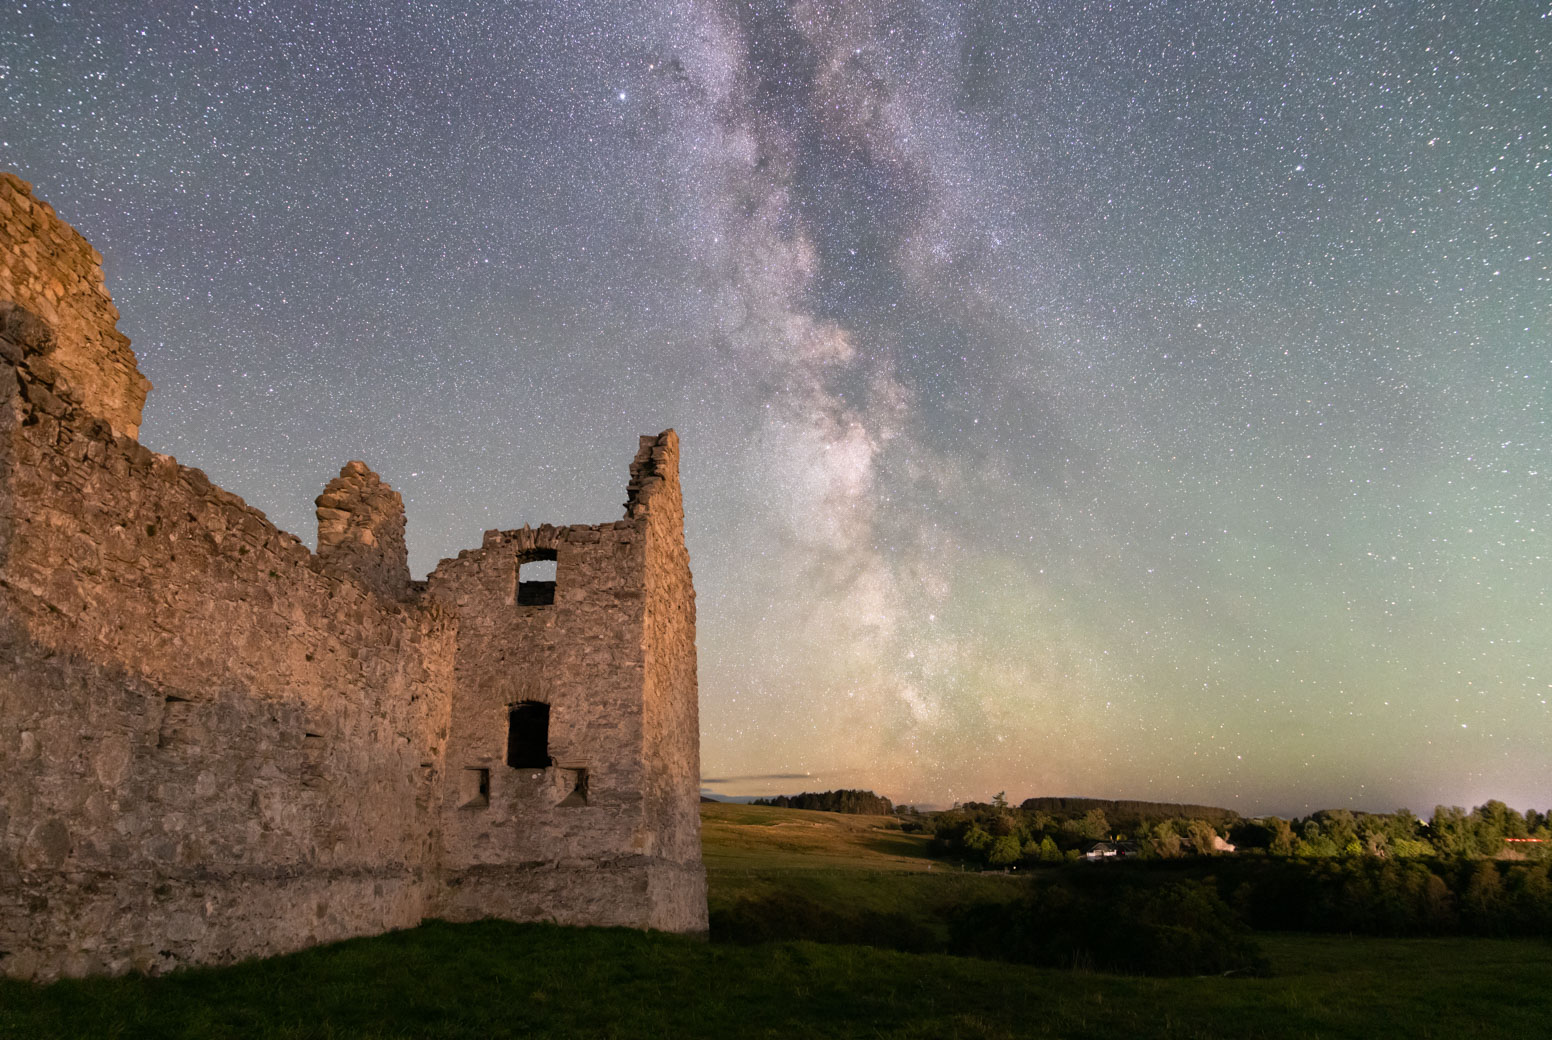 My joint favourite photo from the night spent photographing the Milky Way in August 2022